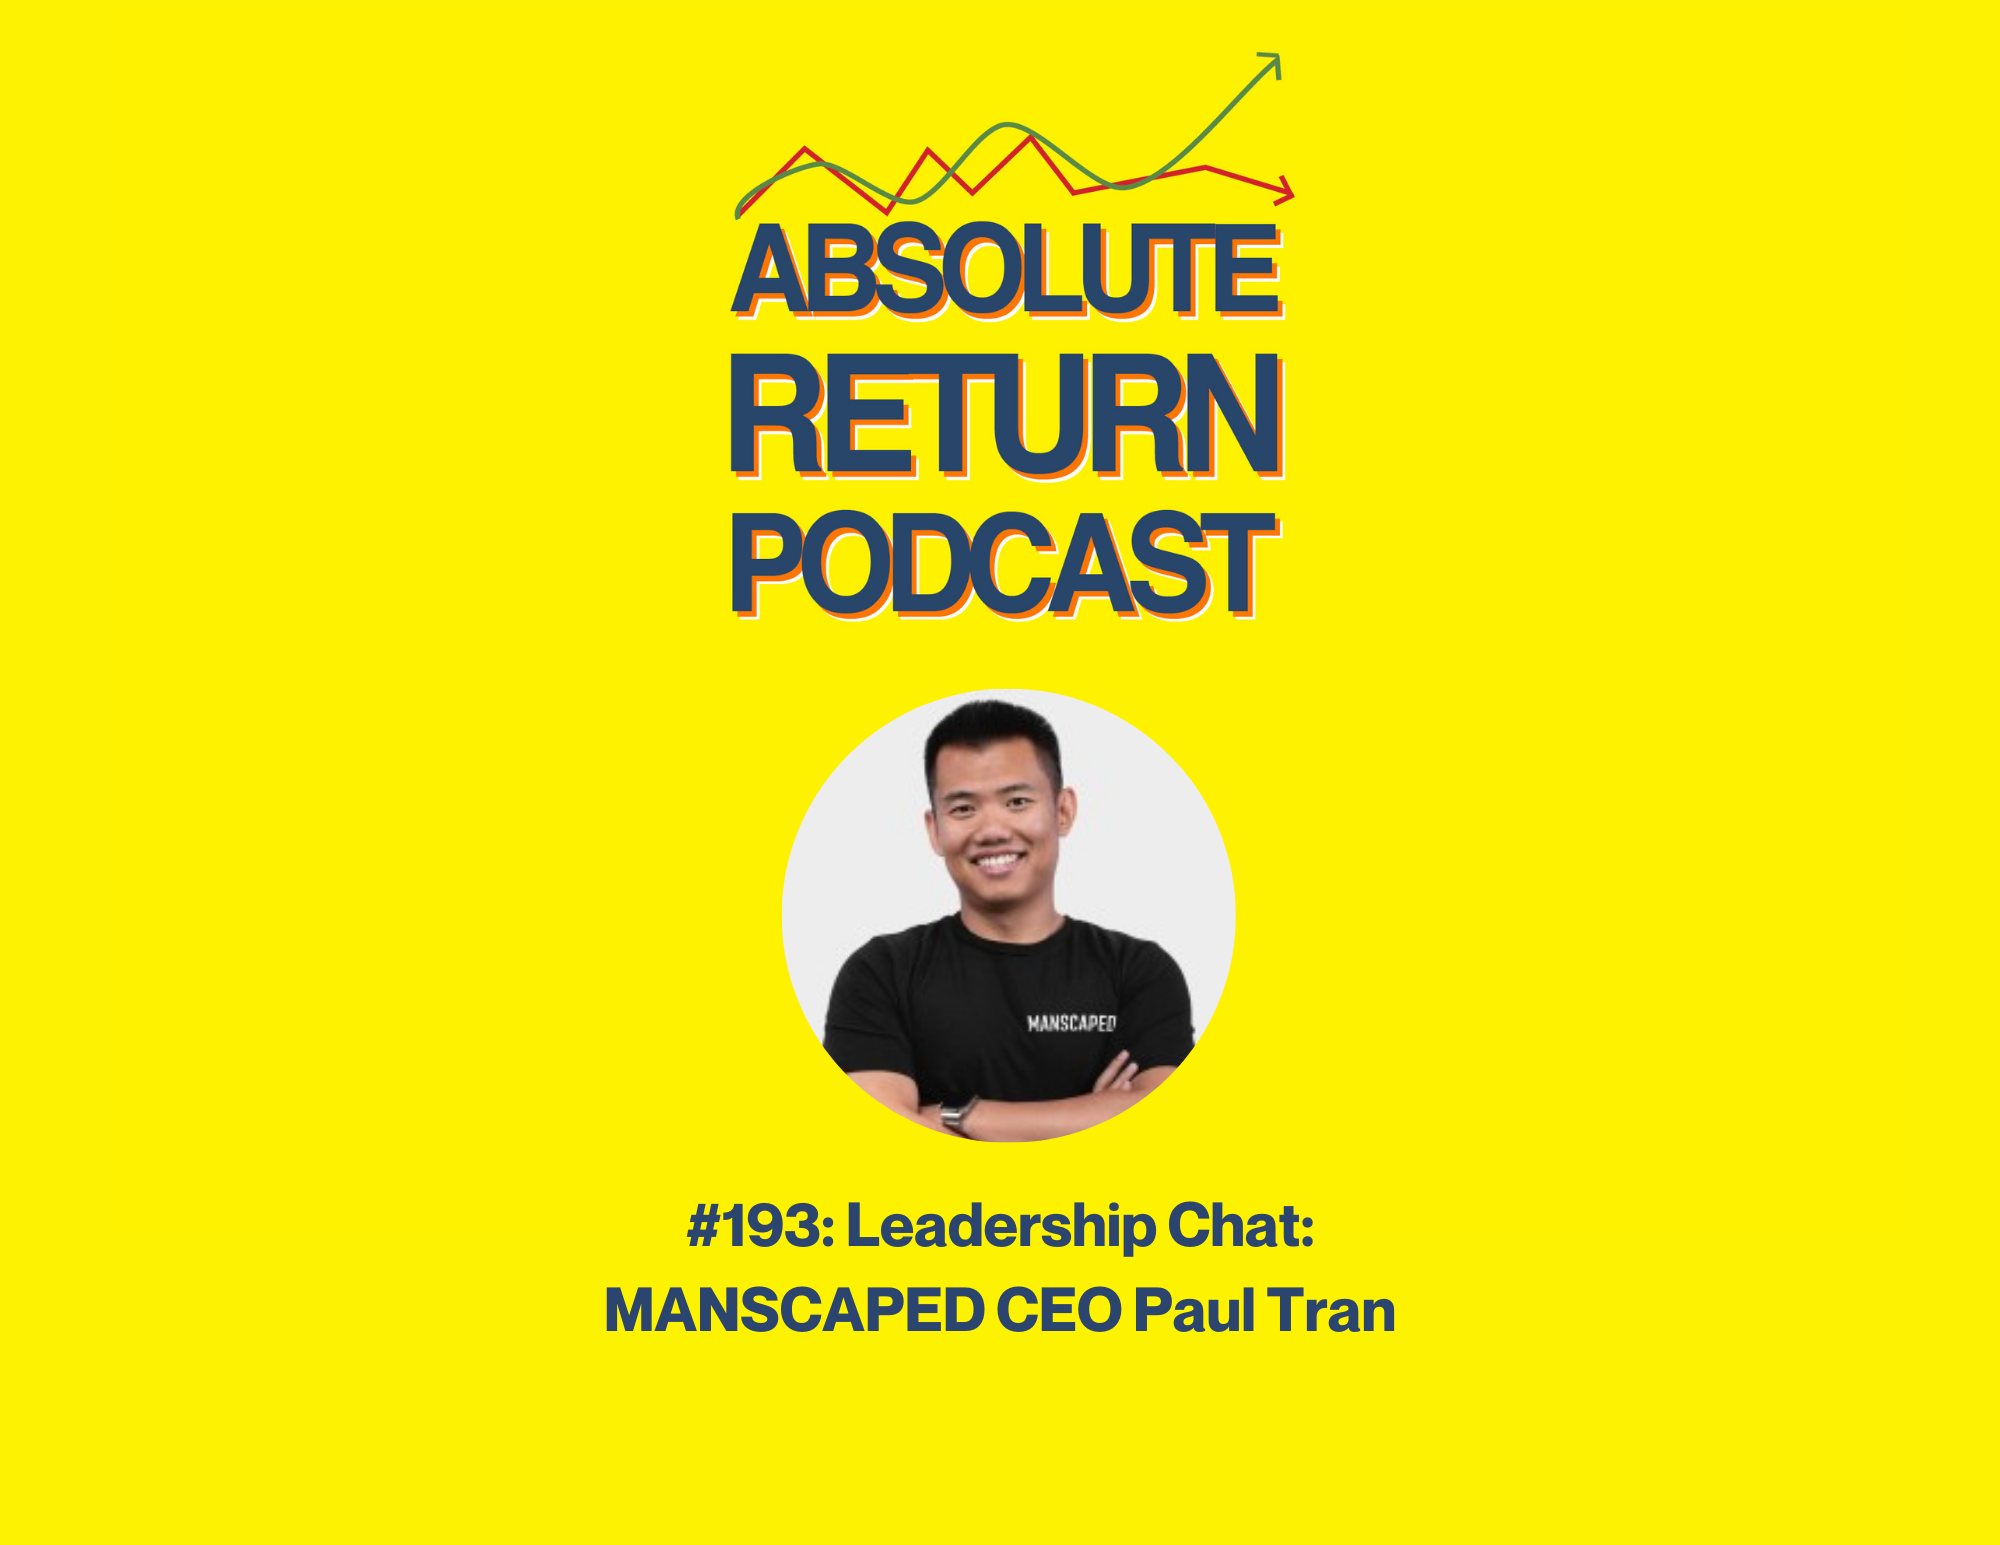 Absolute Return Podcast #193: Leadership Chat: MANSCAPED CEO Paul Tran